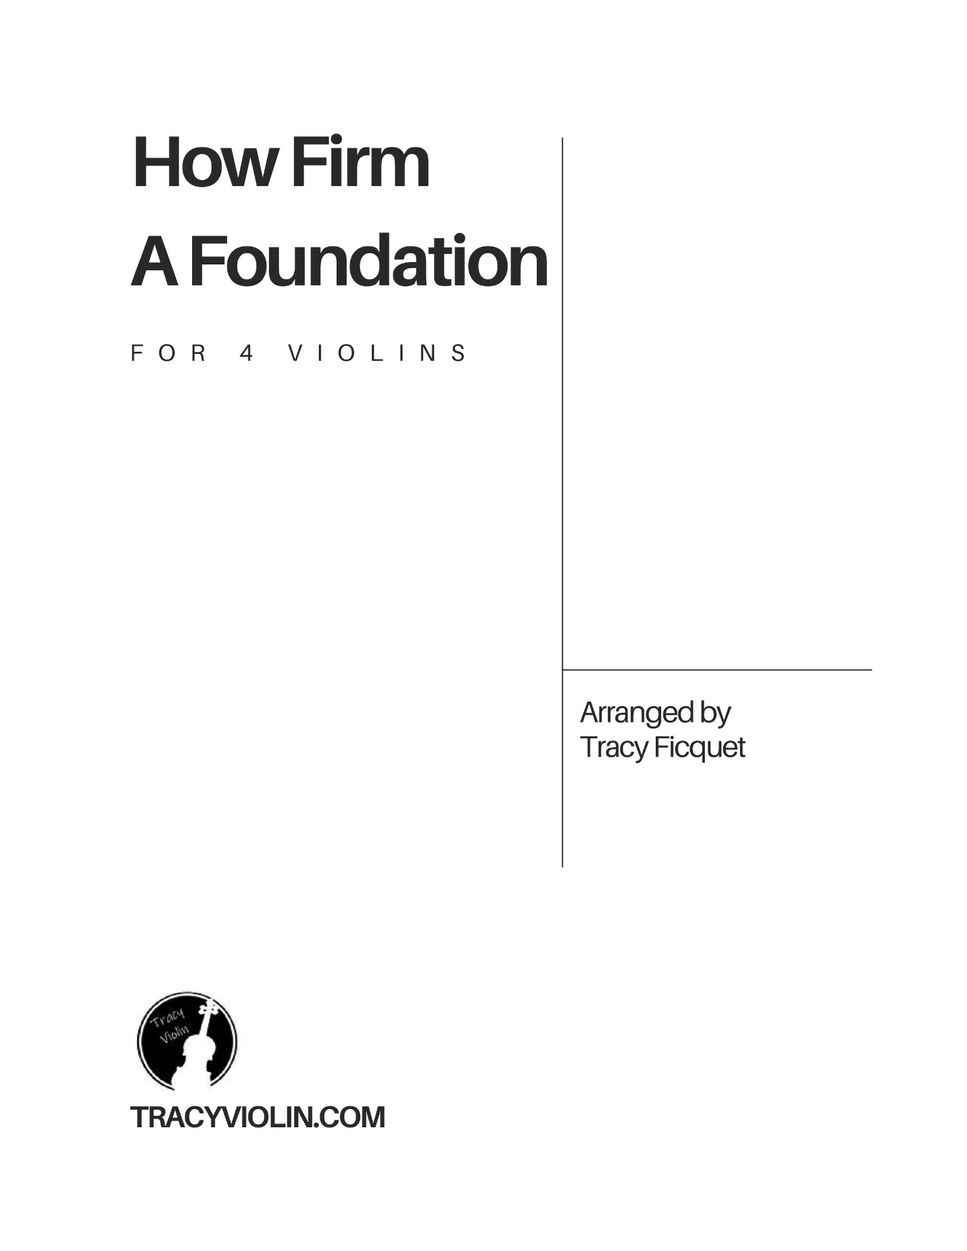 Tracy Ficquet - How Firm A Foundation (For 4 Violins) by Tracy Ficquet